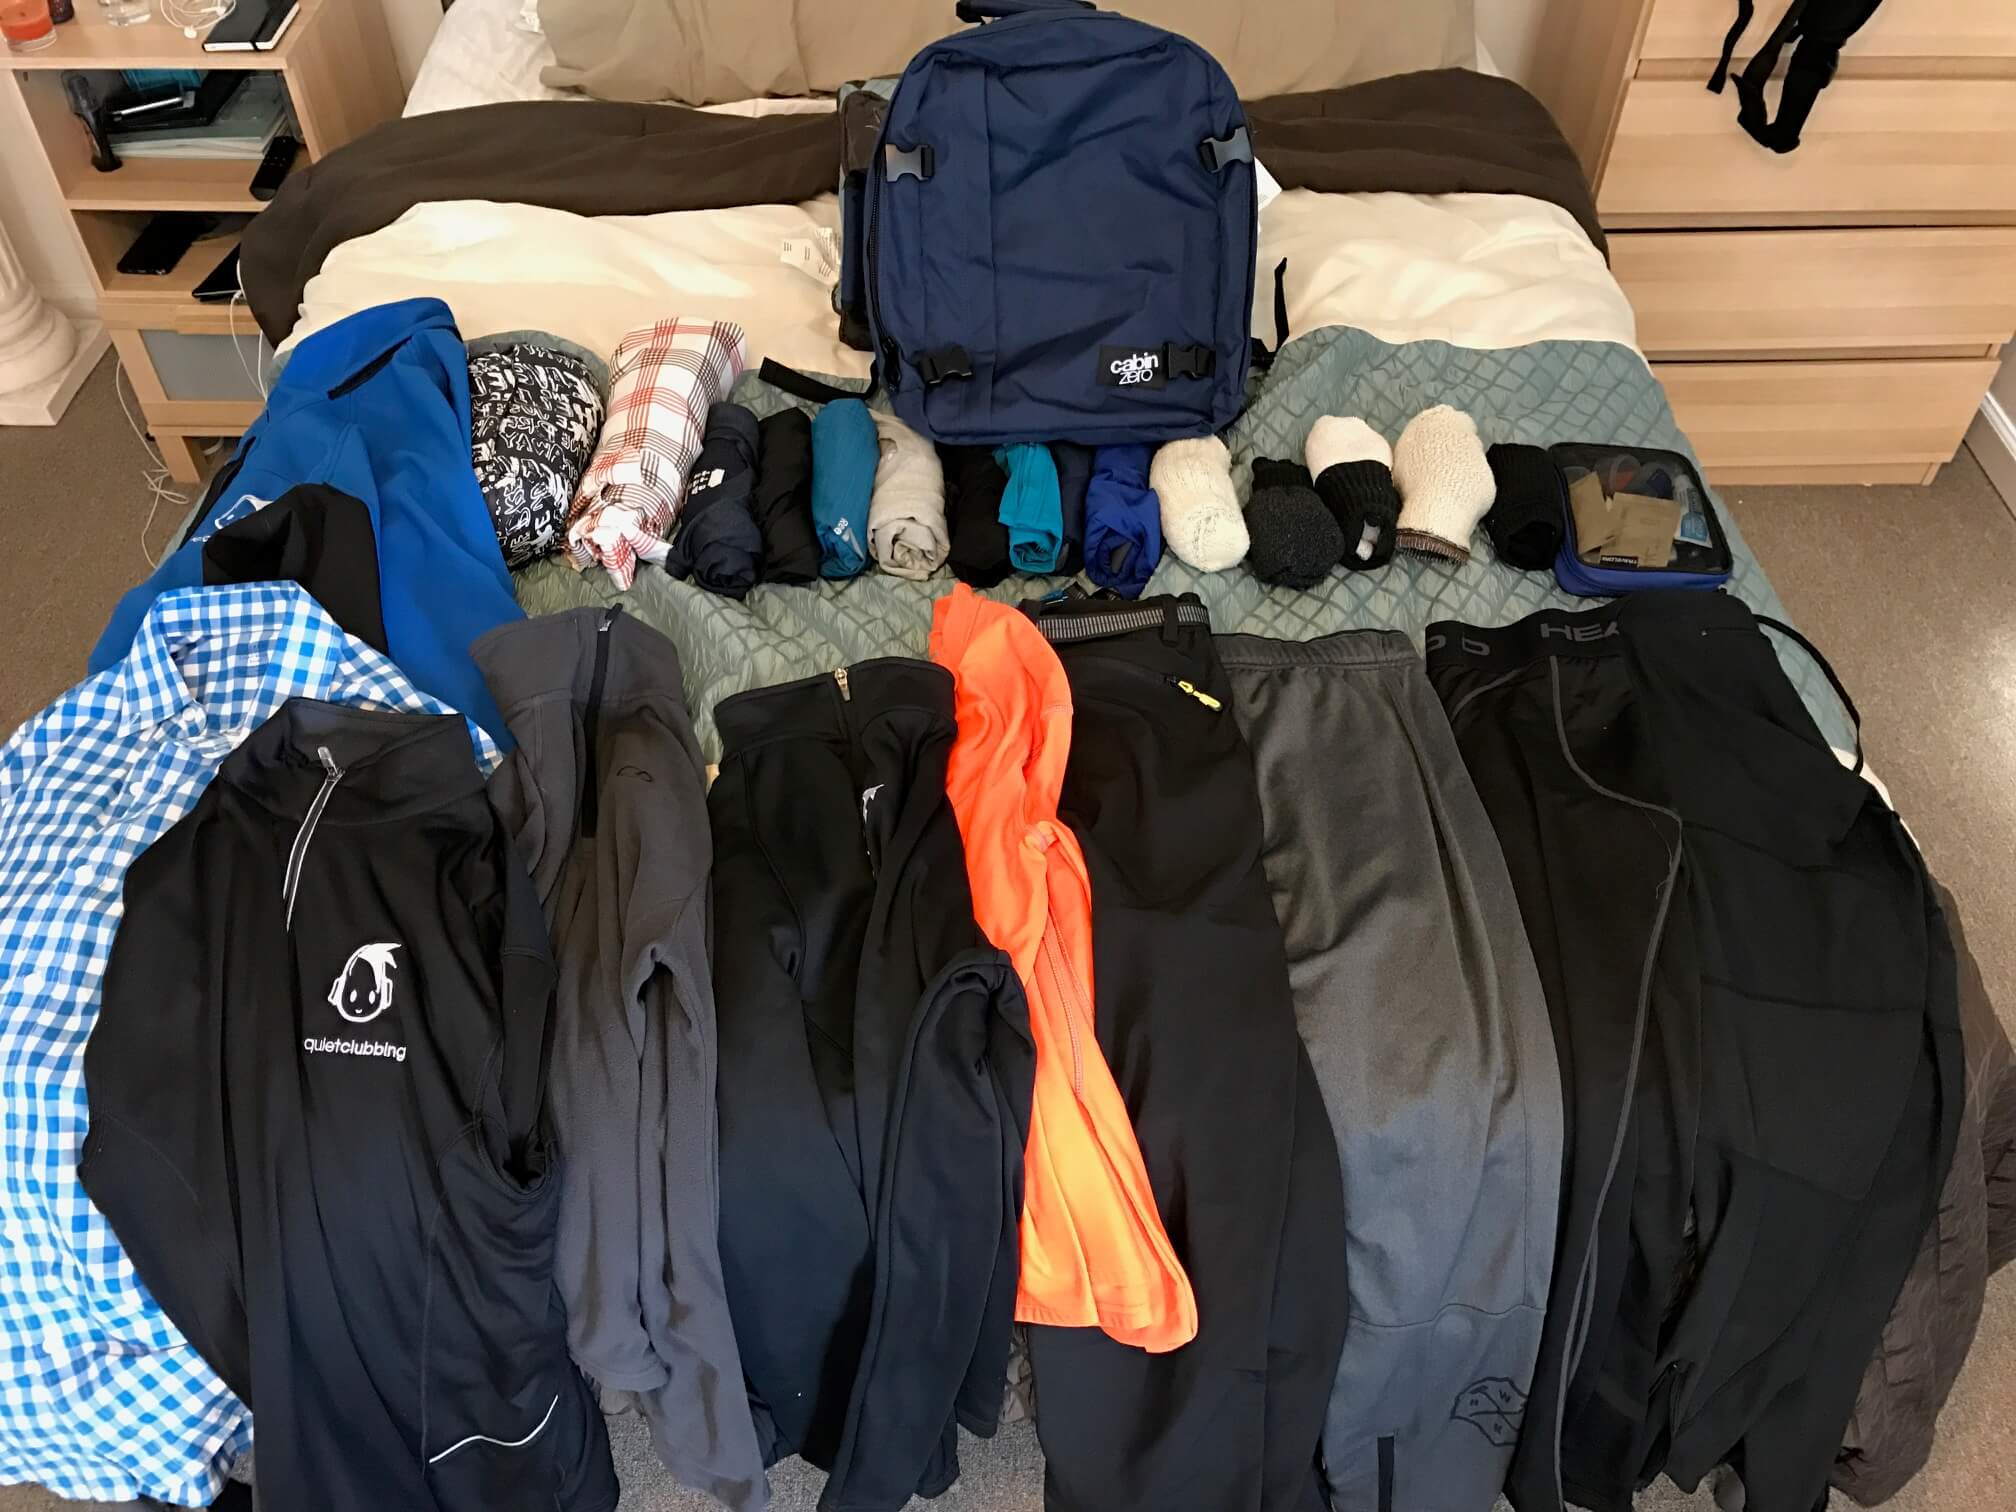 Clothes and luggage items laid out on a bed to show you the best Backpack to avoid luggage fees